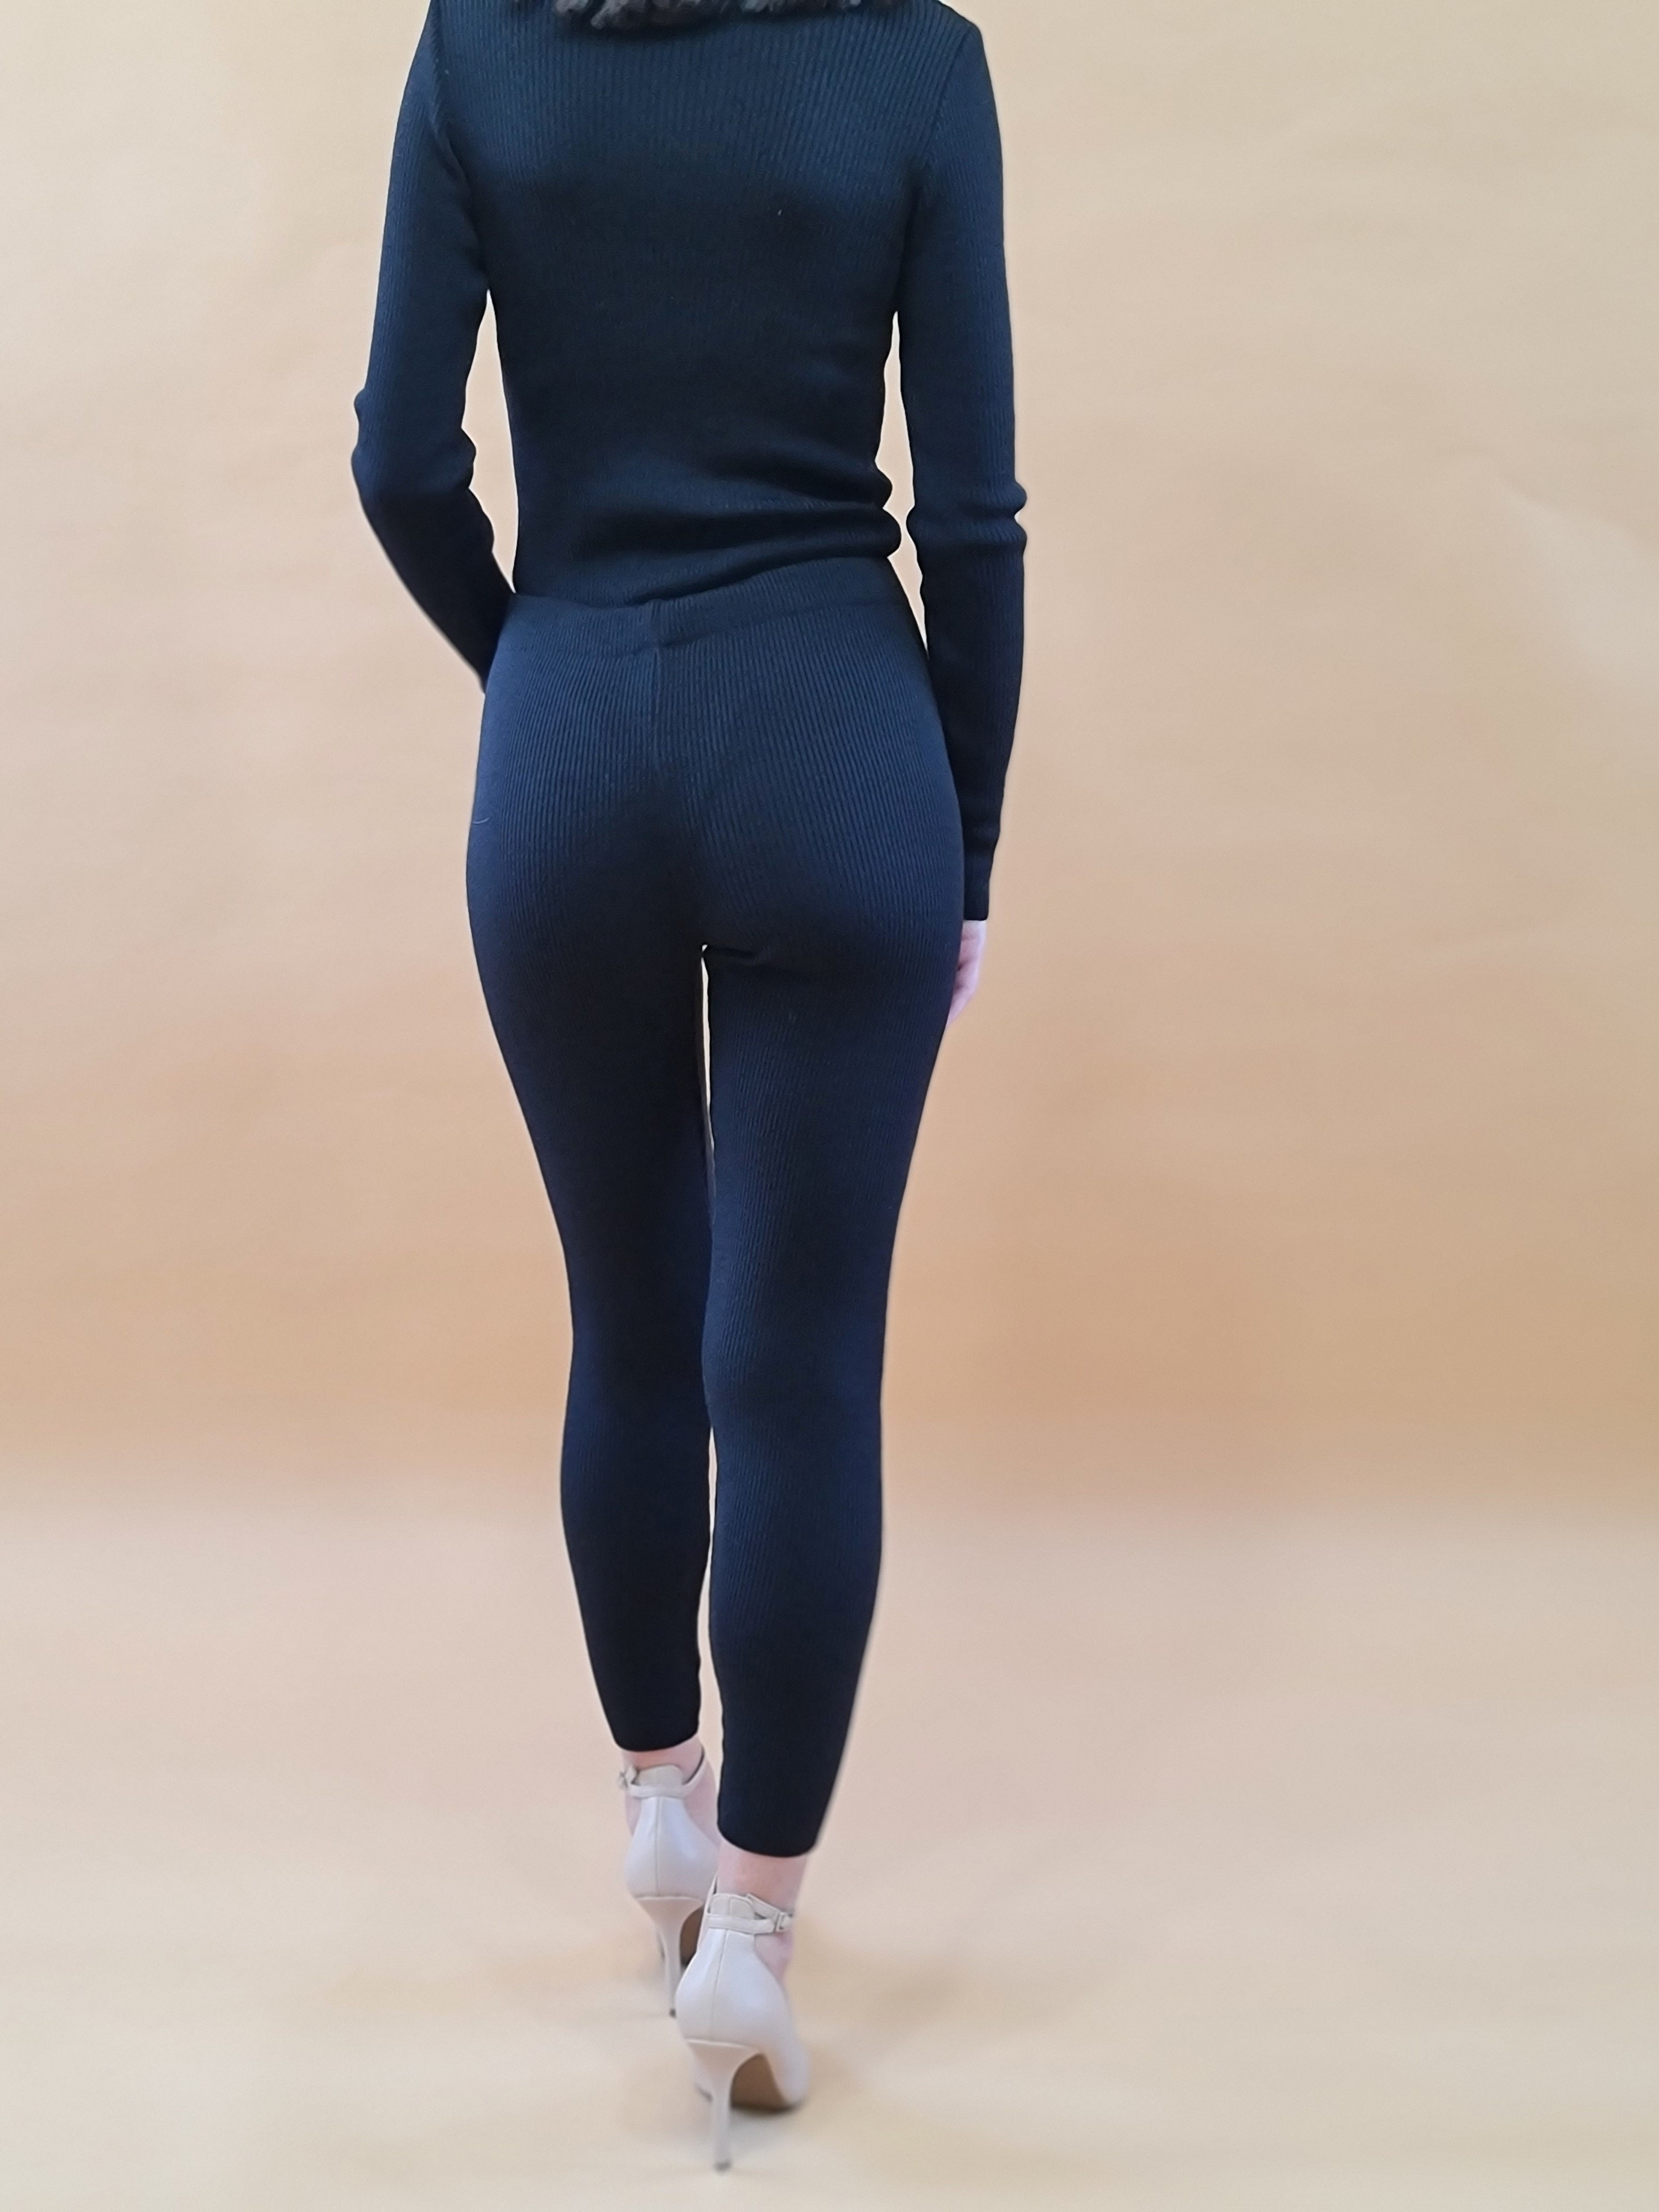 Wholesale women's leggings by top quality brands | Mirta